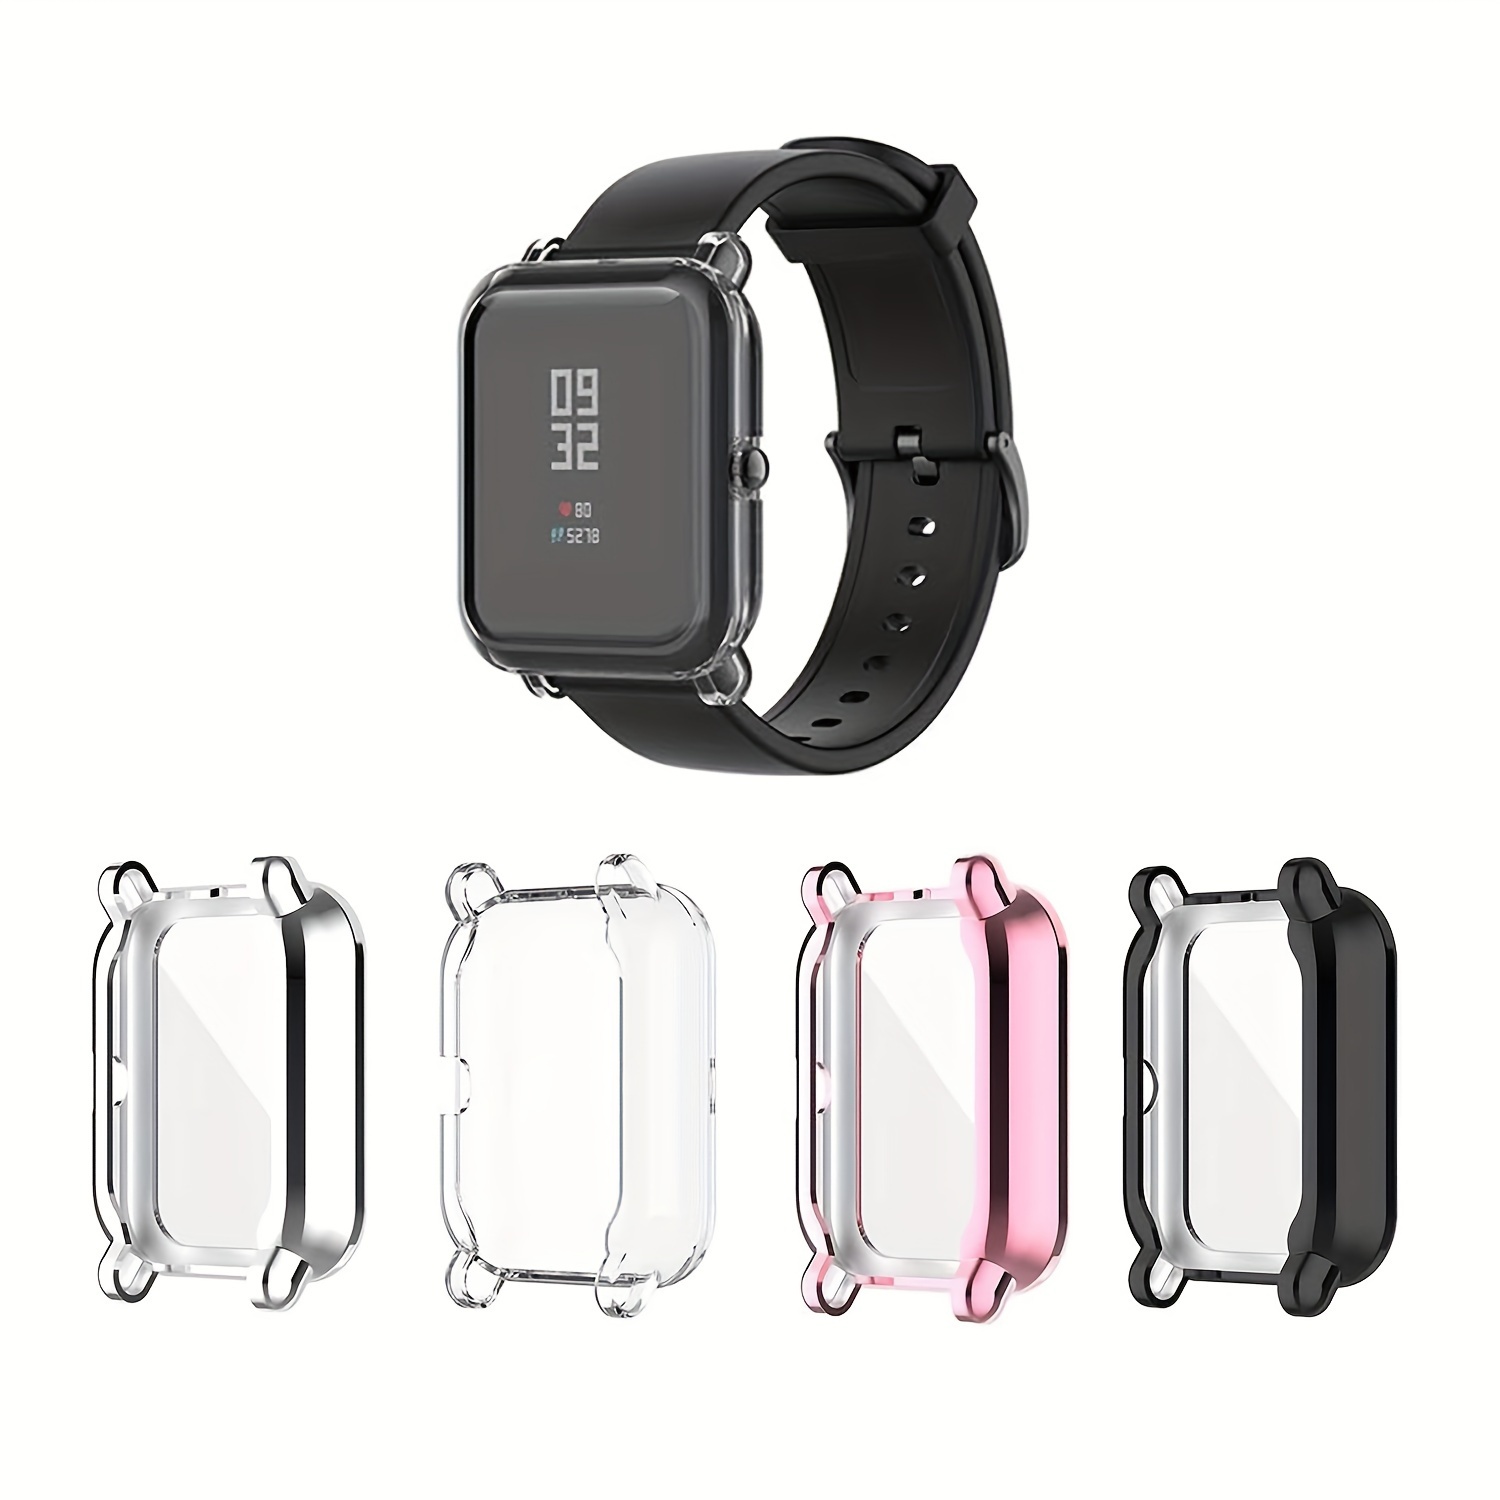 Protective Case Compatible for Amazfit Bip 3/Bip 3 Pro Watch Case Cover,  Screen Protector All-Around Case Hard PC Bumper Cover Shell Cases for Bip